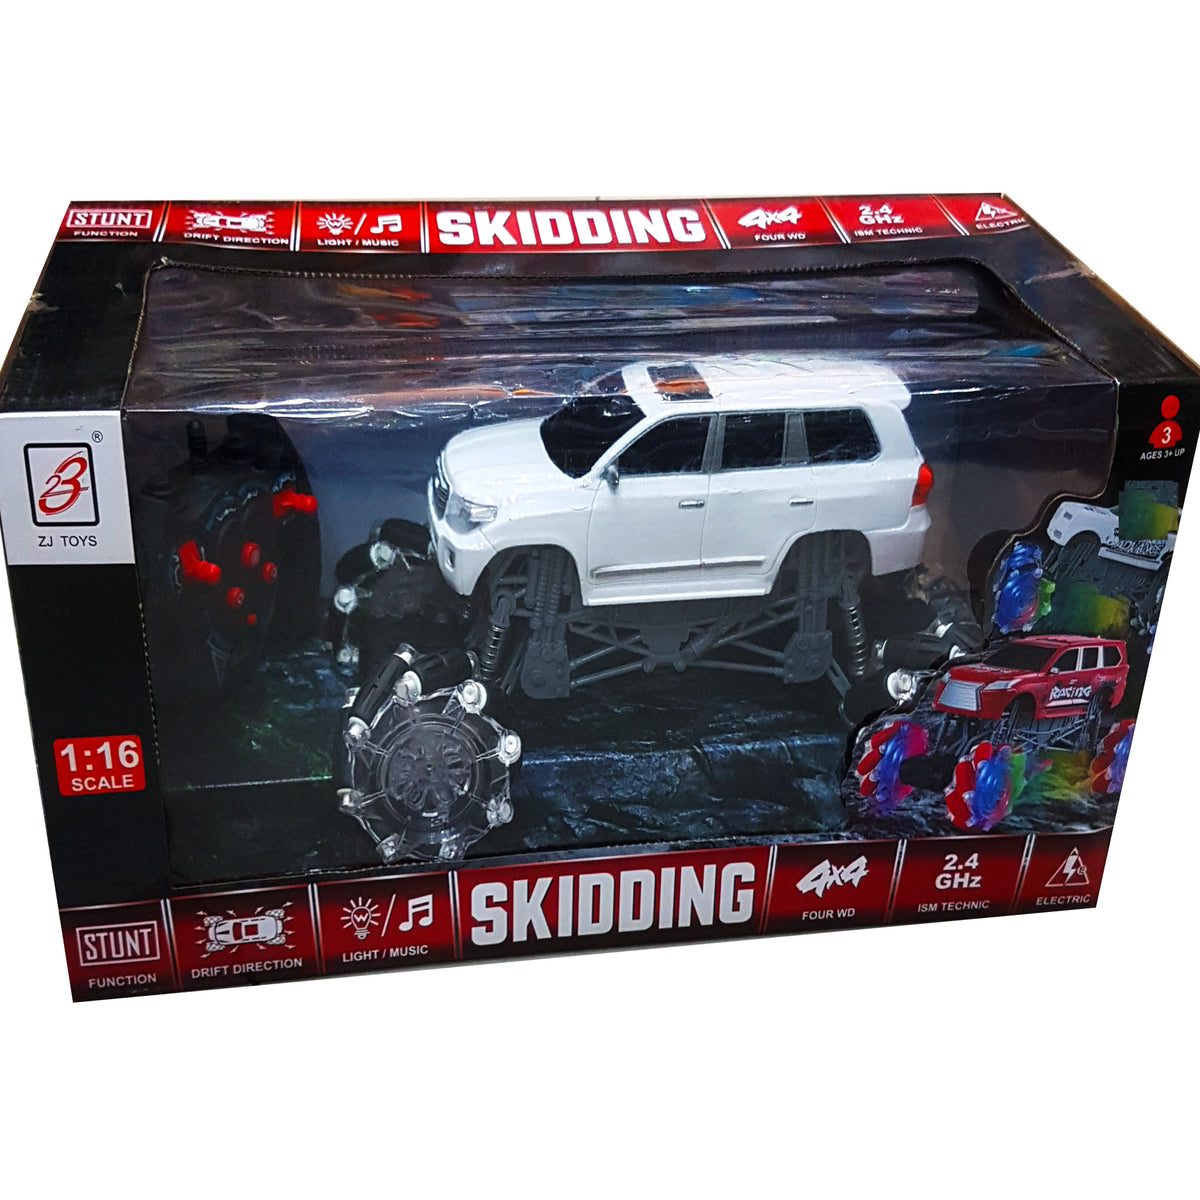 New Arrival 2023: 4x4 Remote Control Stunt Car with Lights & Music - 2.4GHz High-Speed RC Car, Perfect Boys' Toy Gift